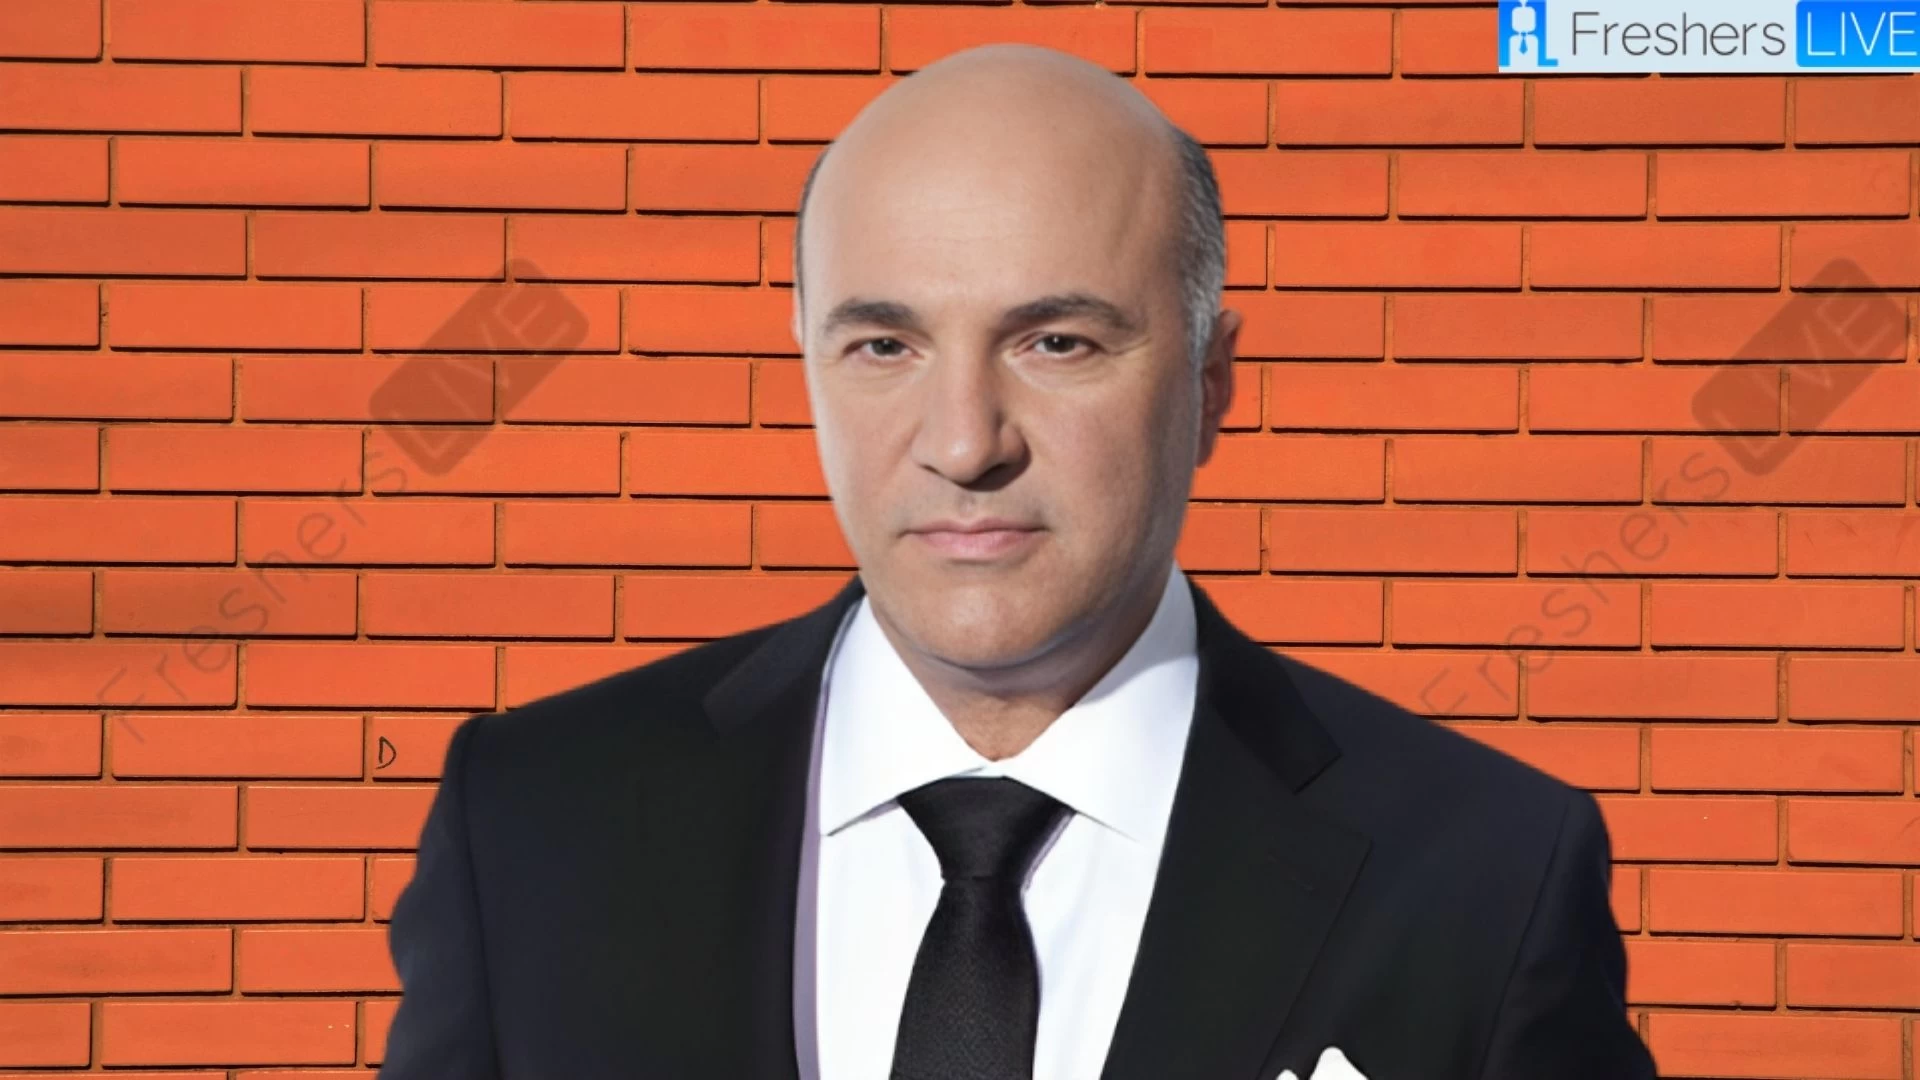 ¿Quiénes son los padres de Kevin O Leary?  Conoce a Terry O'Leary y Georgette O'Leary